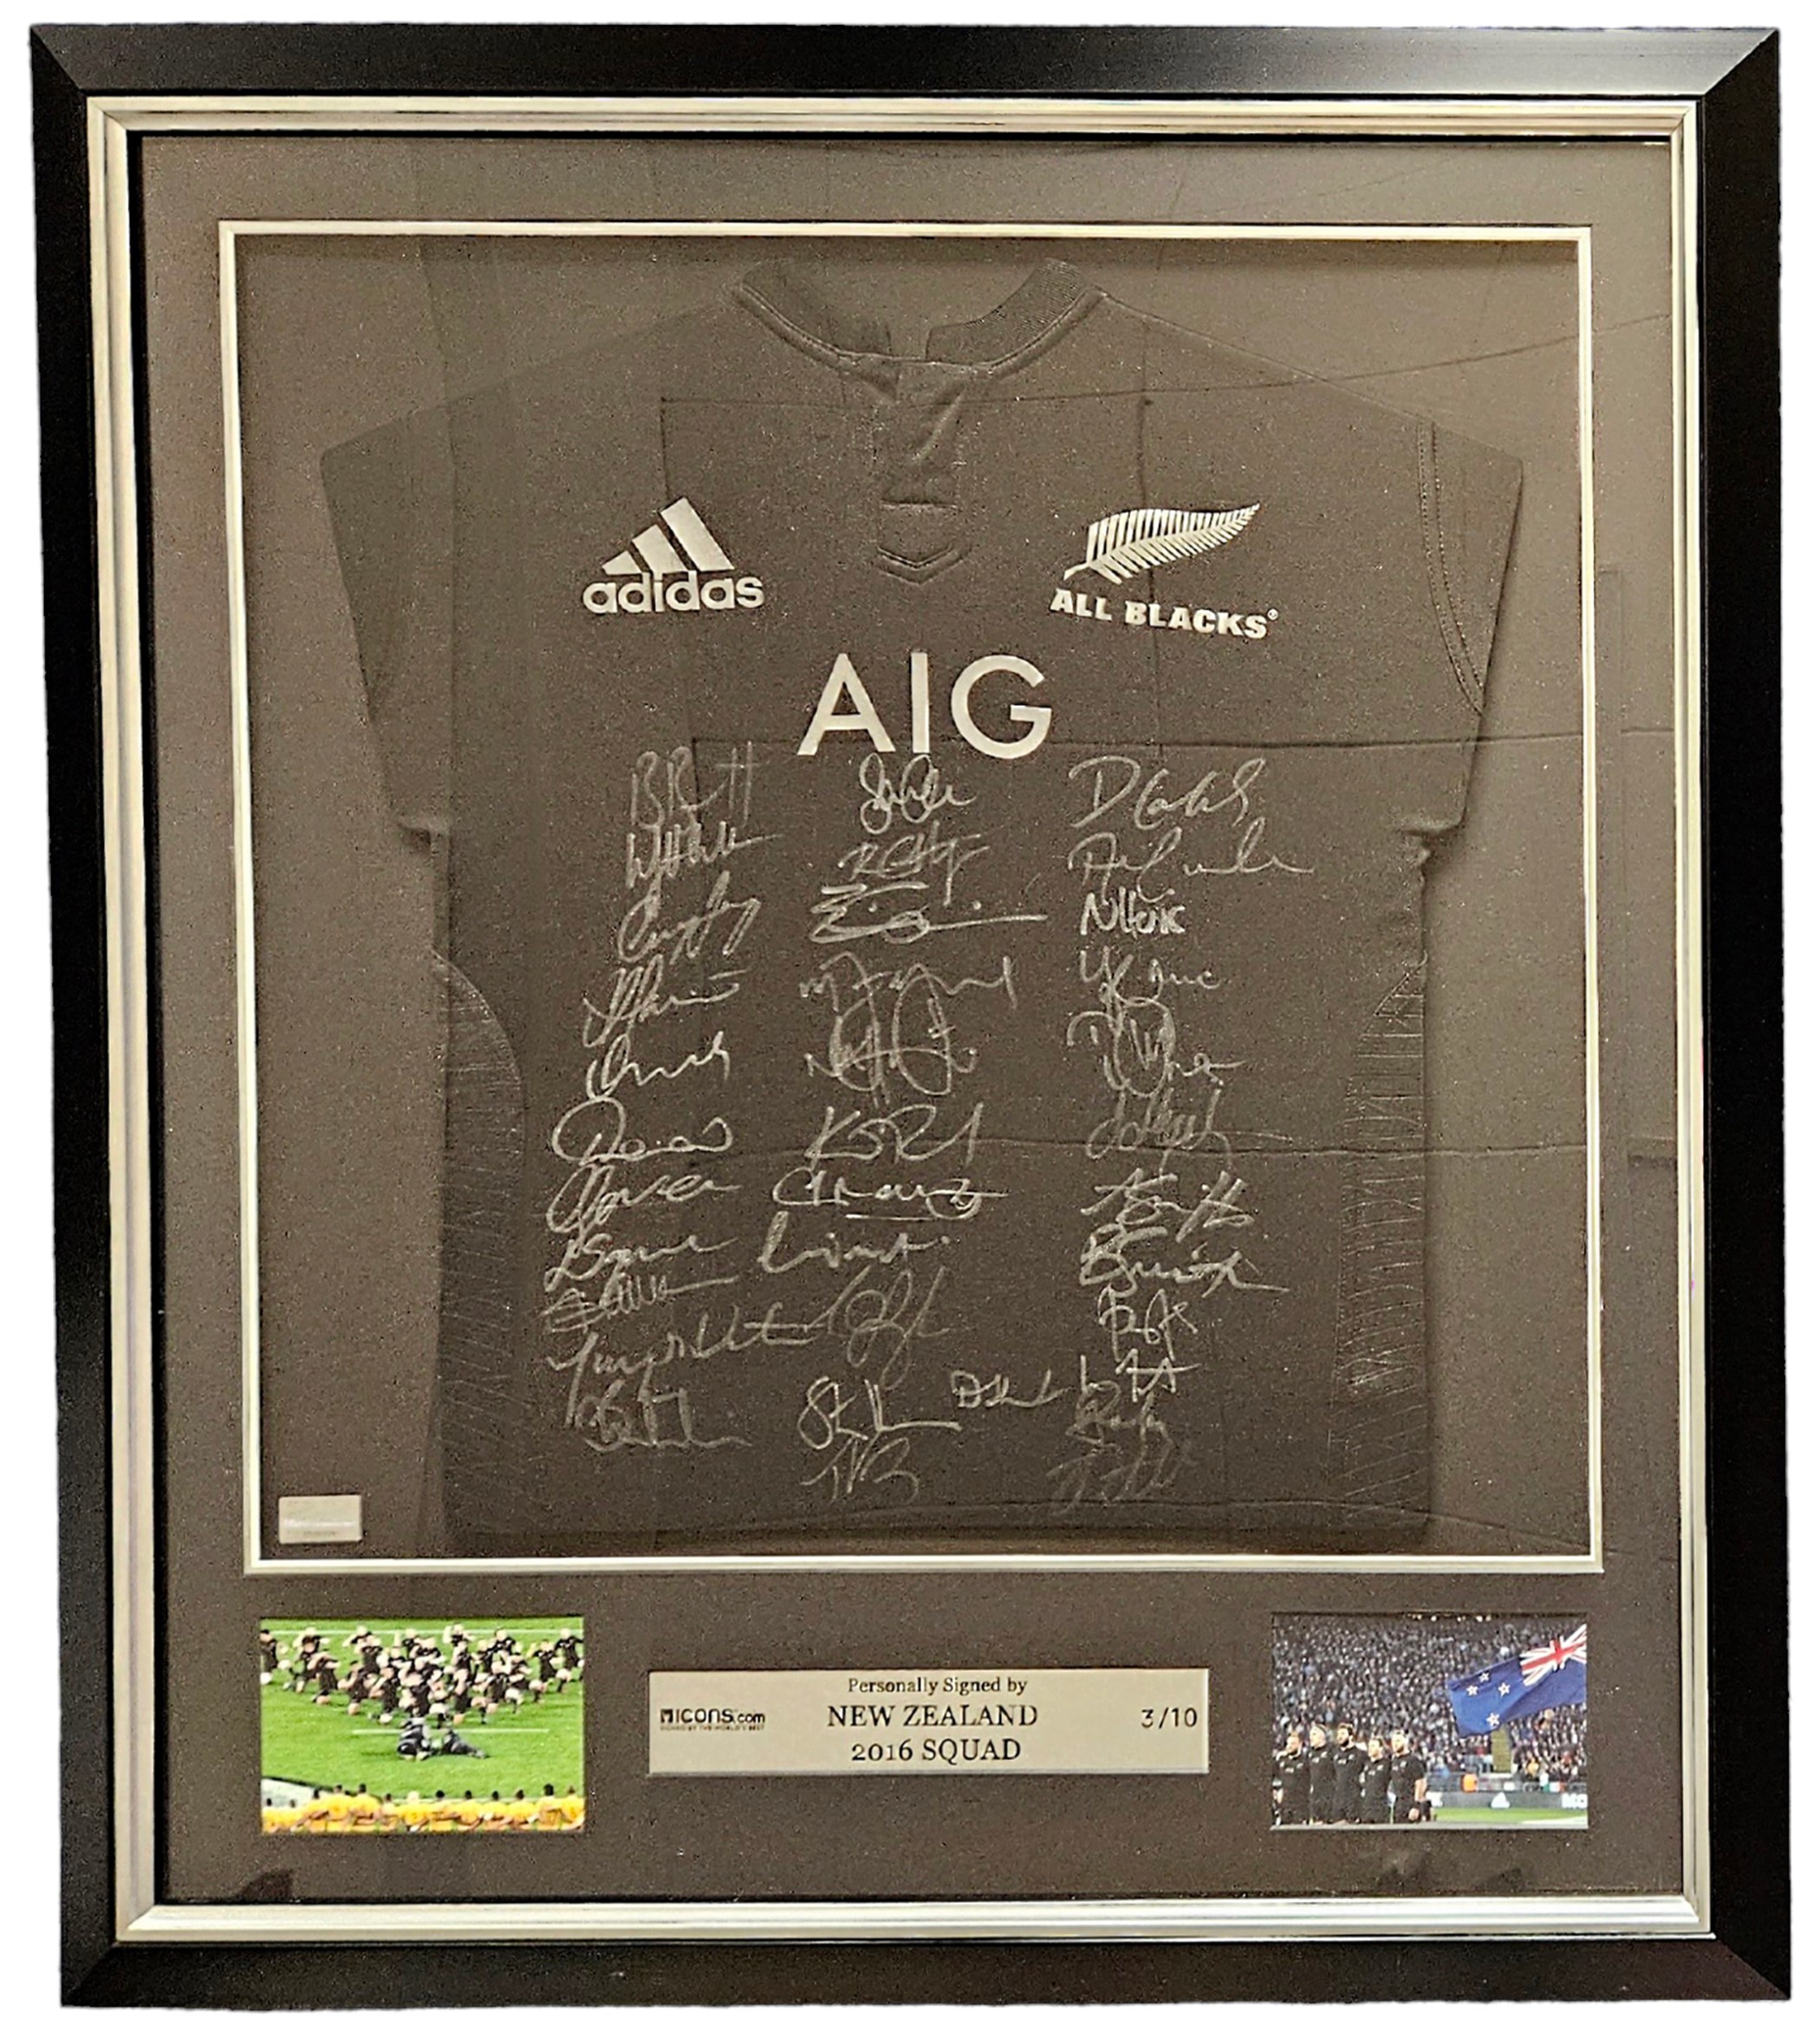 New Zealand All Black Personally signed Ruby Replicate Jersey Shirt limited edition 3/10 framed